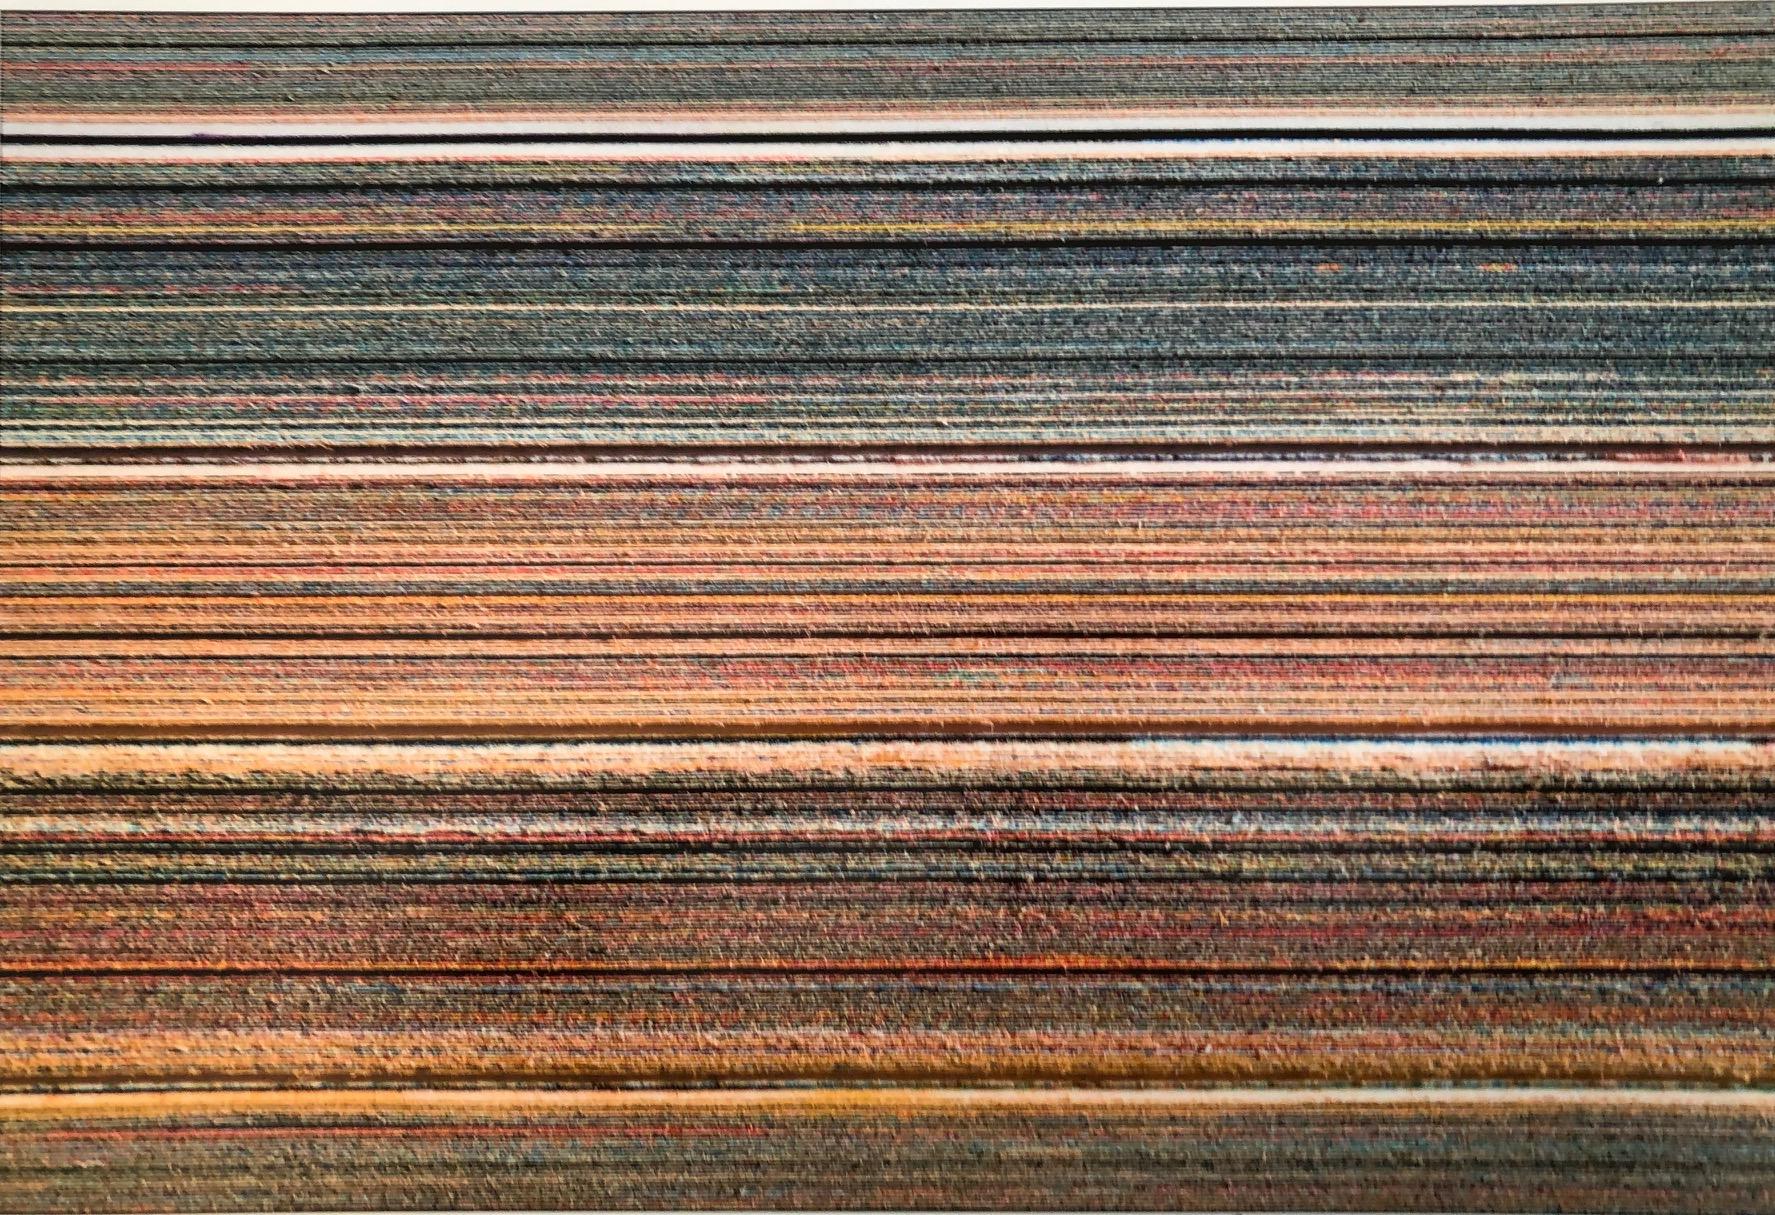 John Cole Abstract Photograph - "For Tomorrow, Full Bleed Series" Stacked magazines striped geometric close ups